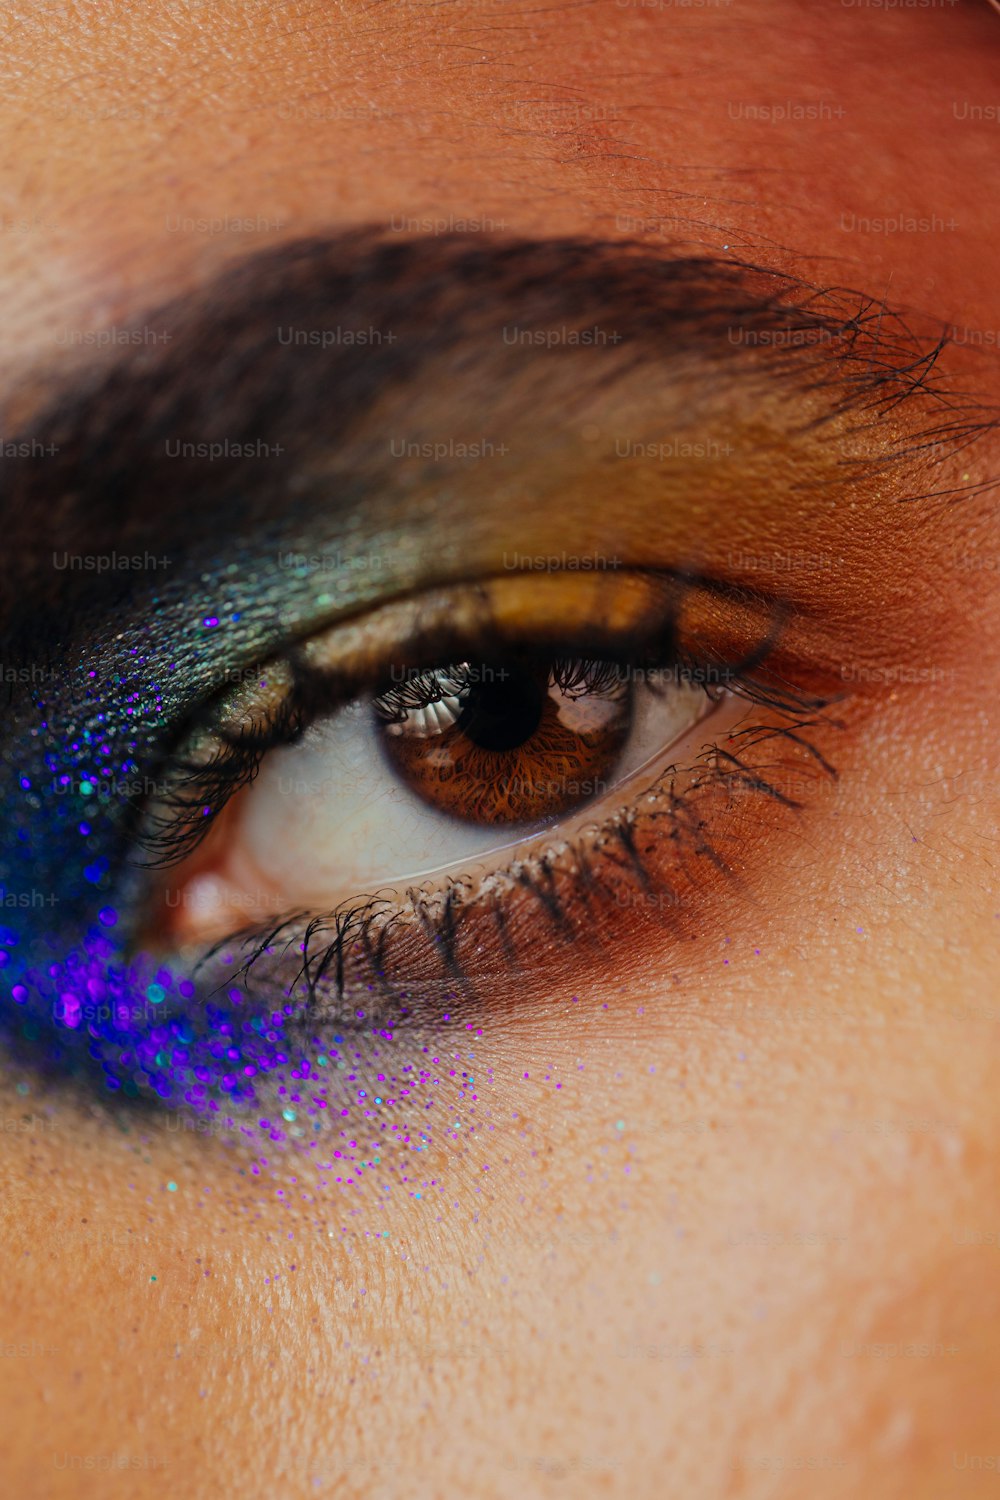 a close up of a person's eye with a blue and purple eye shadow